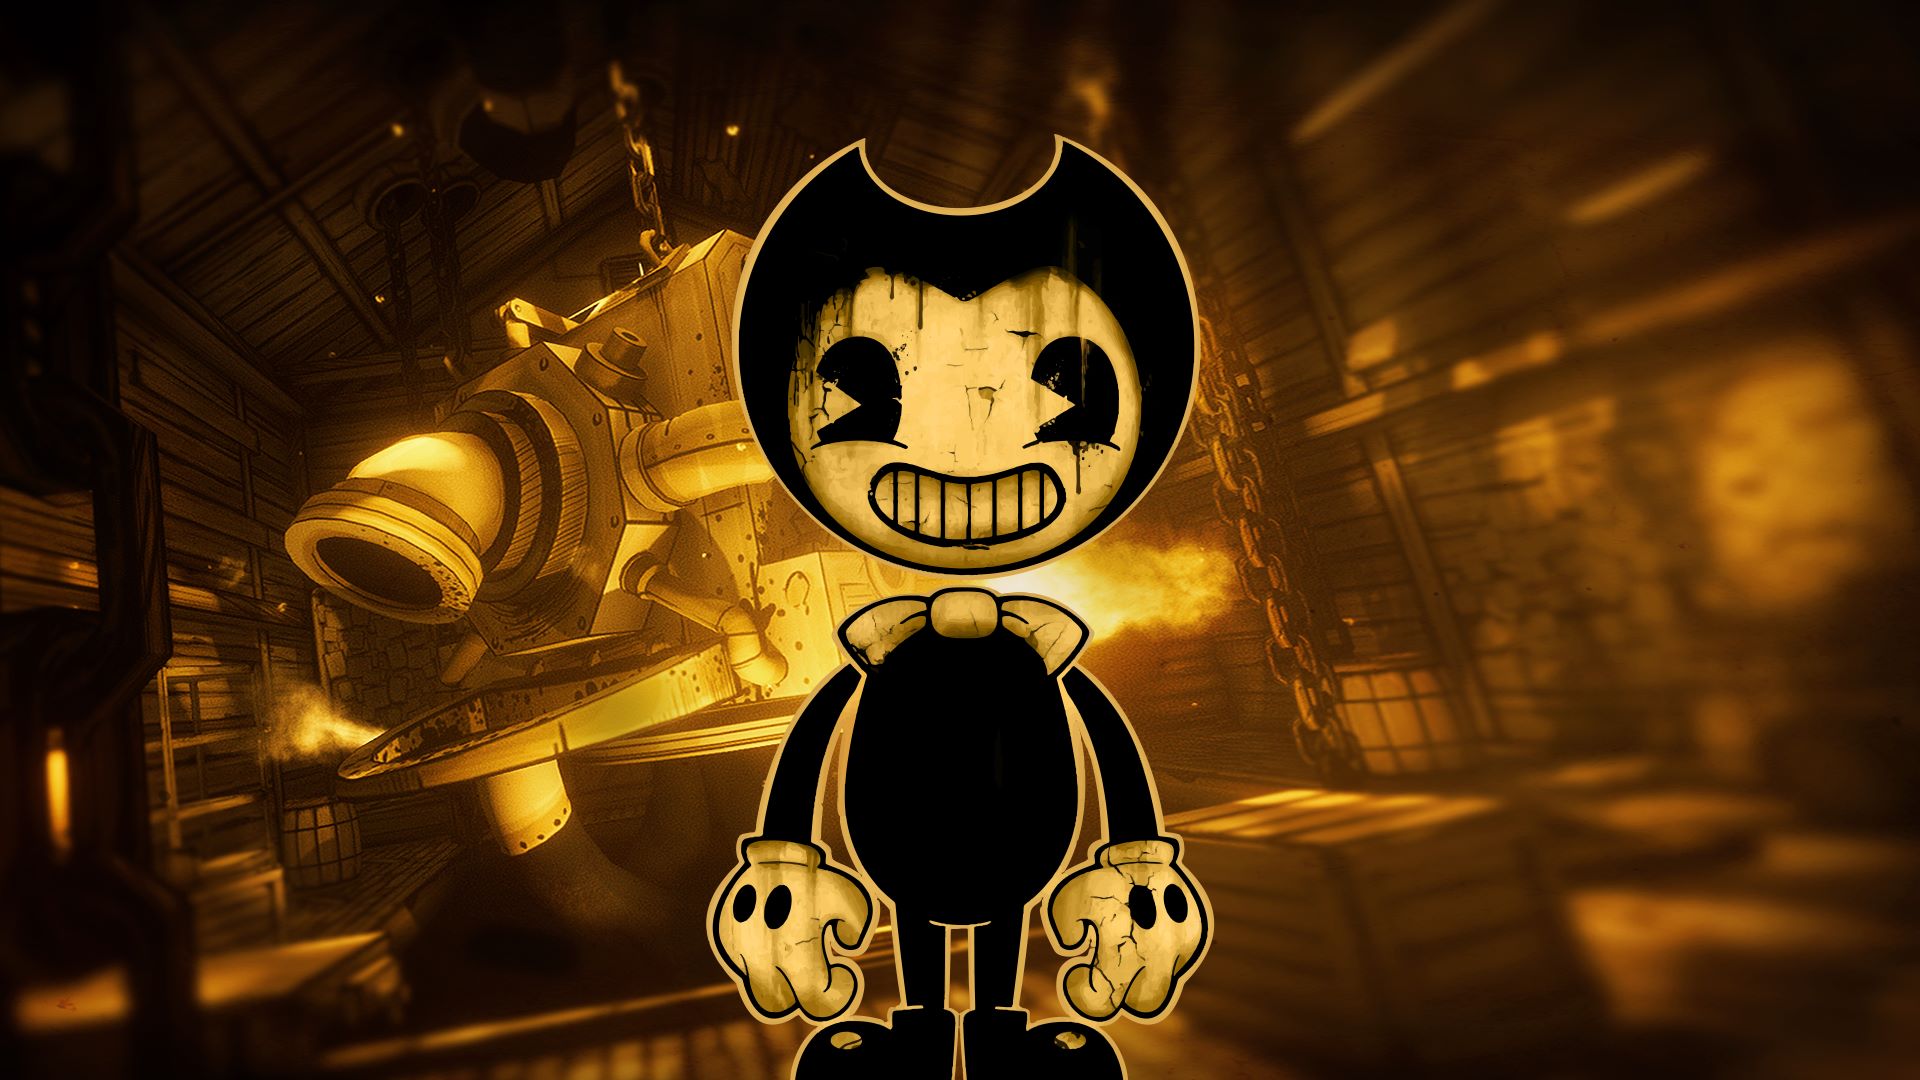 Bendy and the Ink Machine getting full Android port on Dec. 21